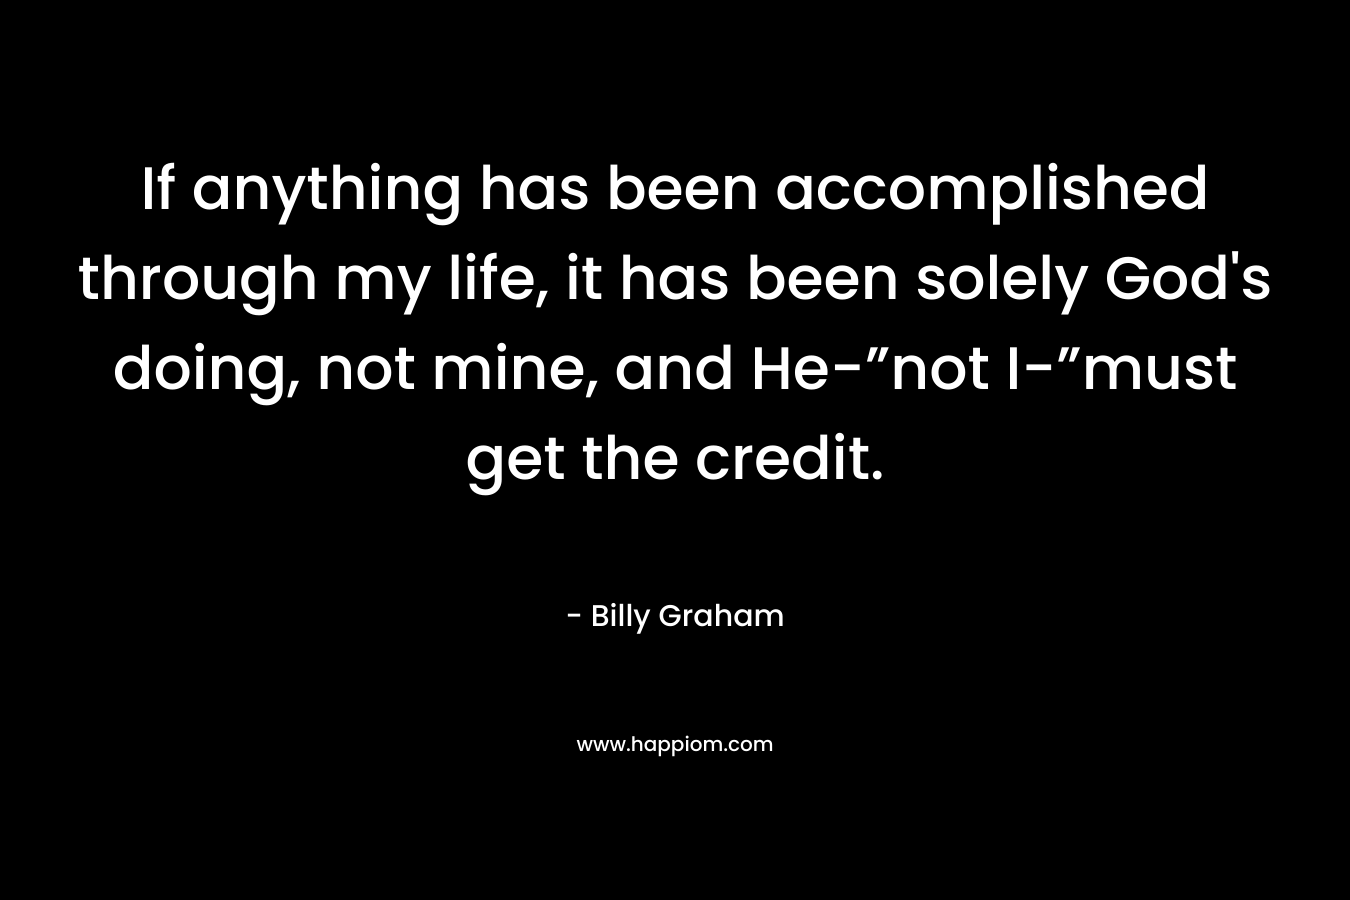 If anything has been accomplished through my life, it has been solely God’s doing, not mine, and He-”not I-”must get the credit. – Billy Graham